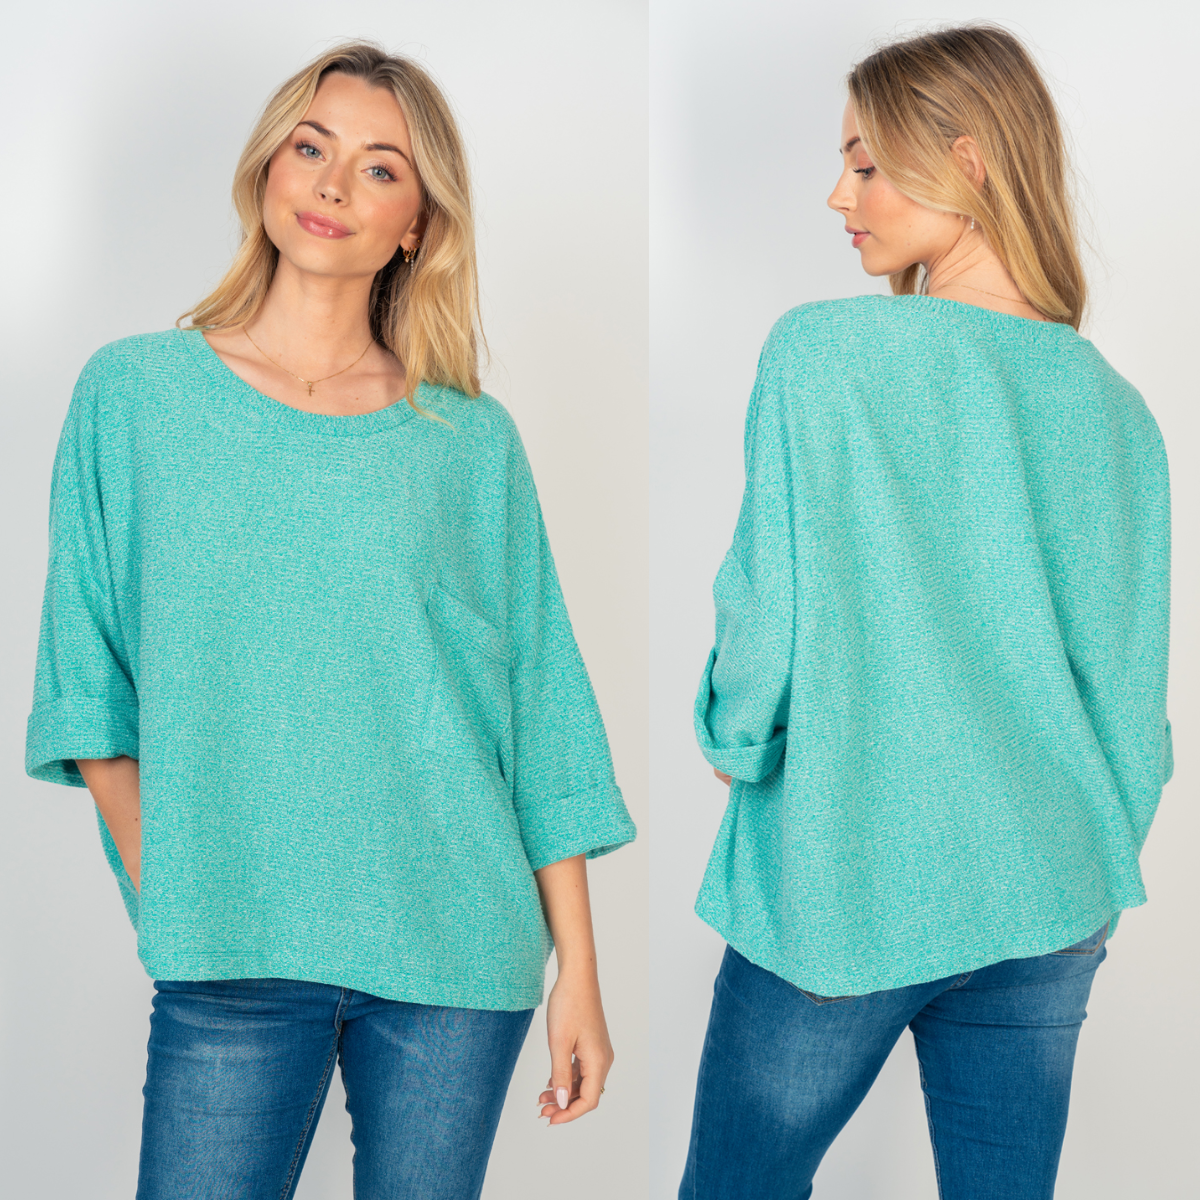 The model is wearing a comfortable FASHION GO Oversized Ribbed Knit Top in Seafoam.